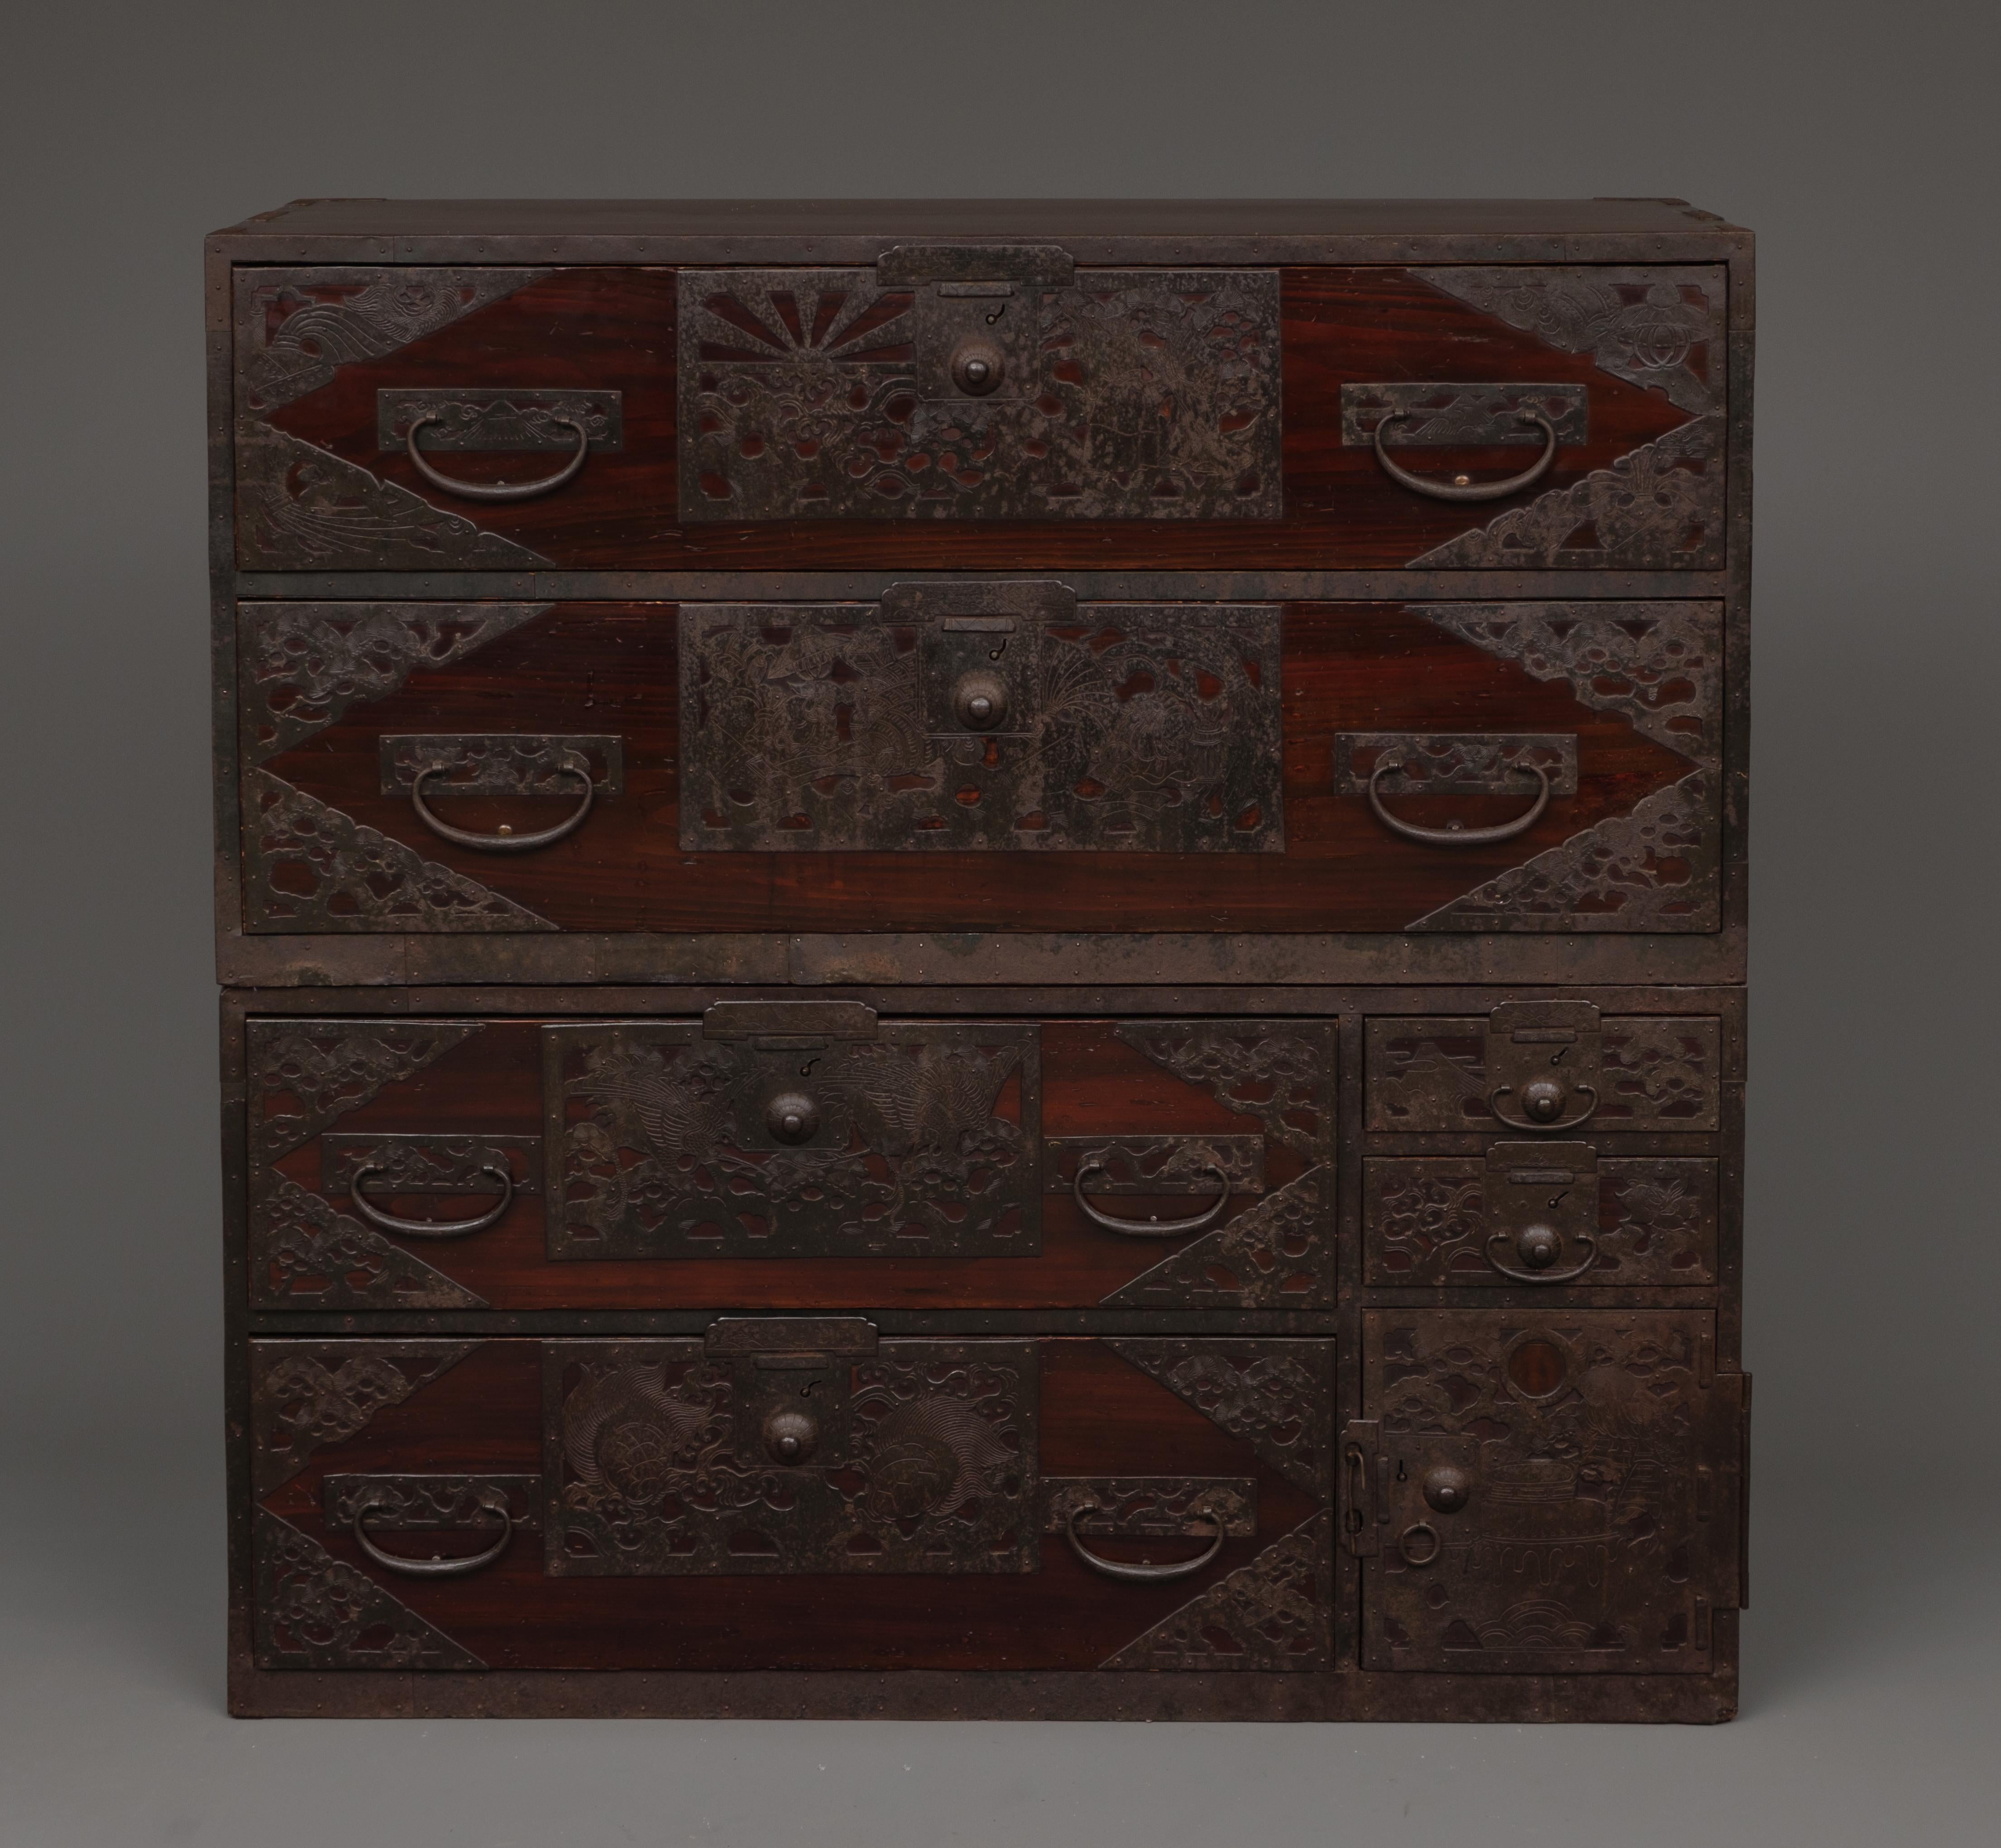 Hand-Crafted Japanese Sado ishô’dansu 衣装箪笥 (cabinet of drawers) with extensive iron hardware For Sale